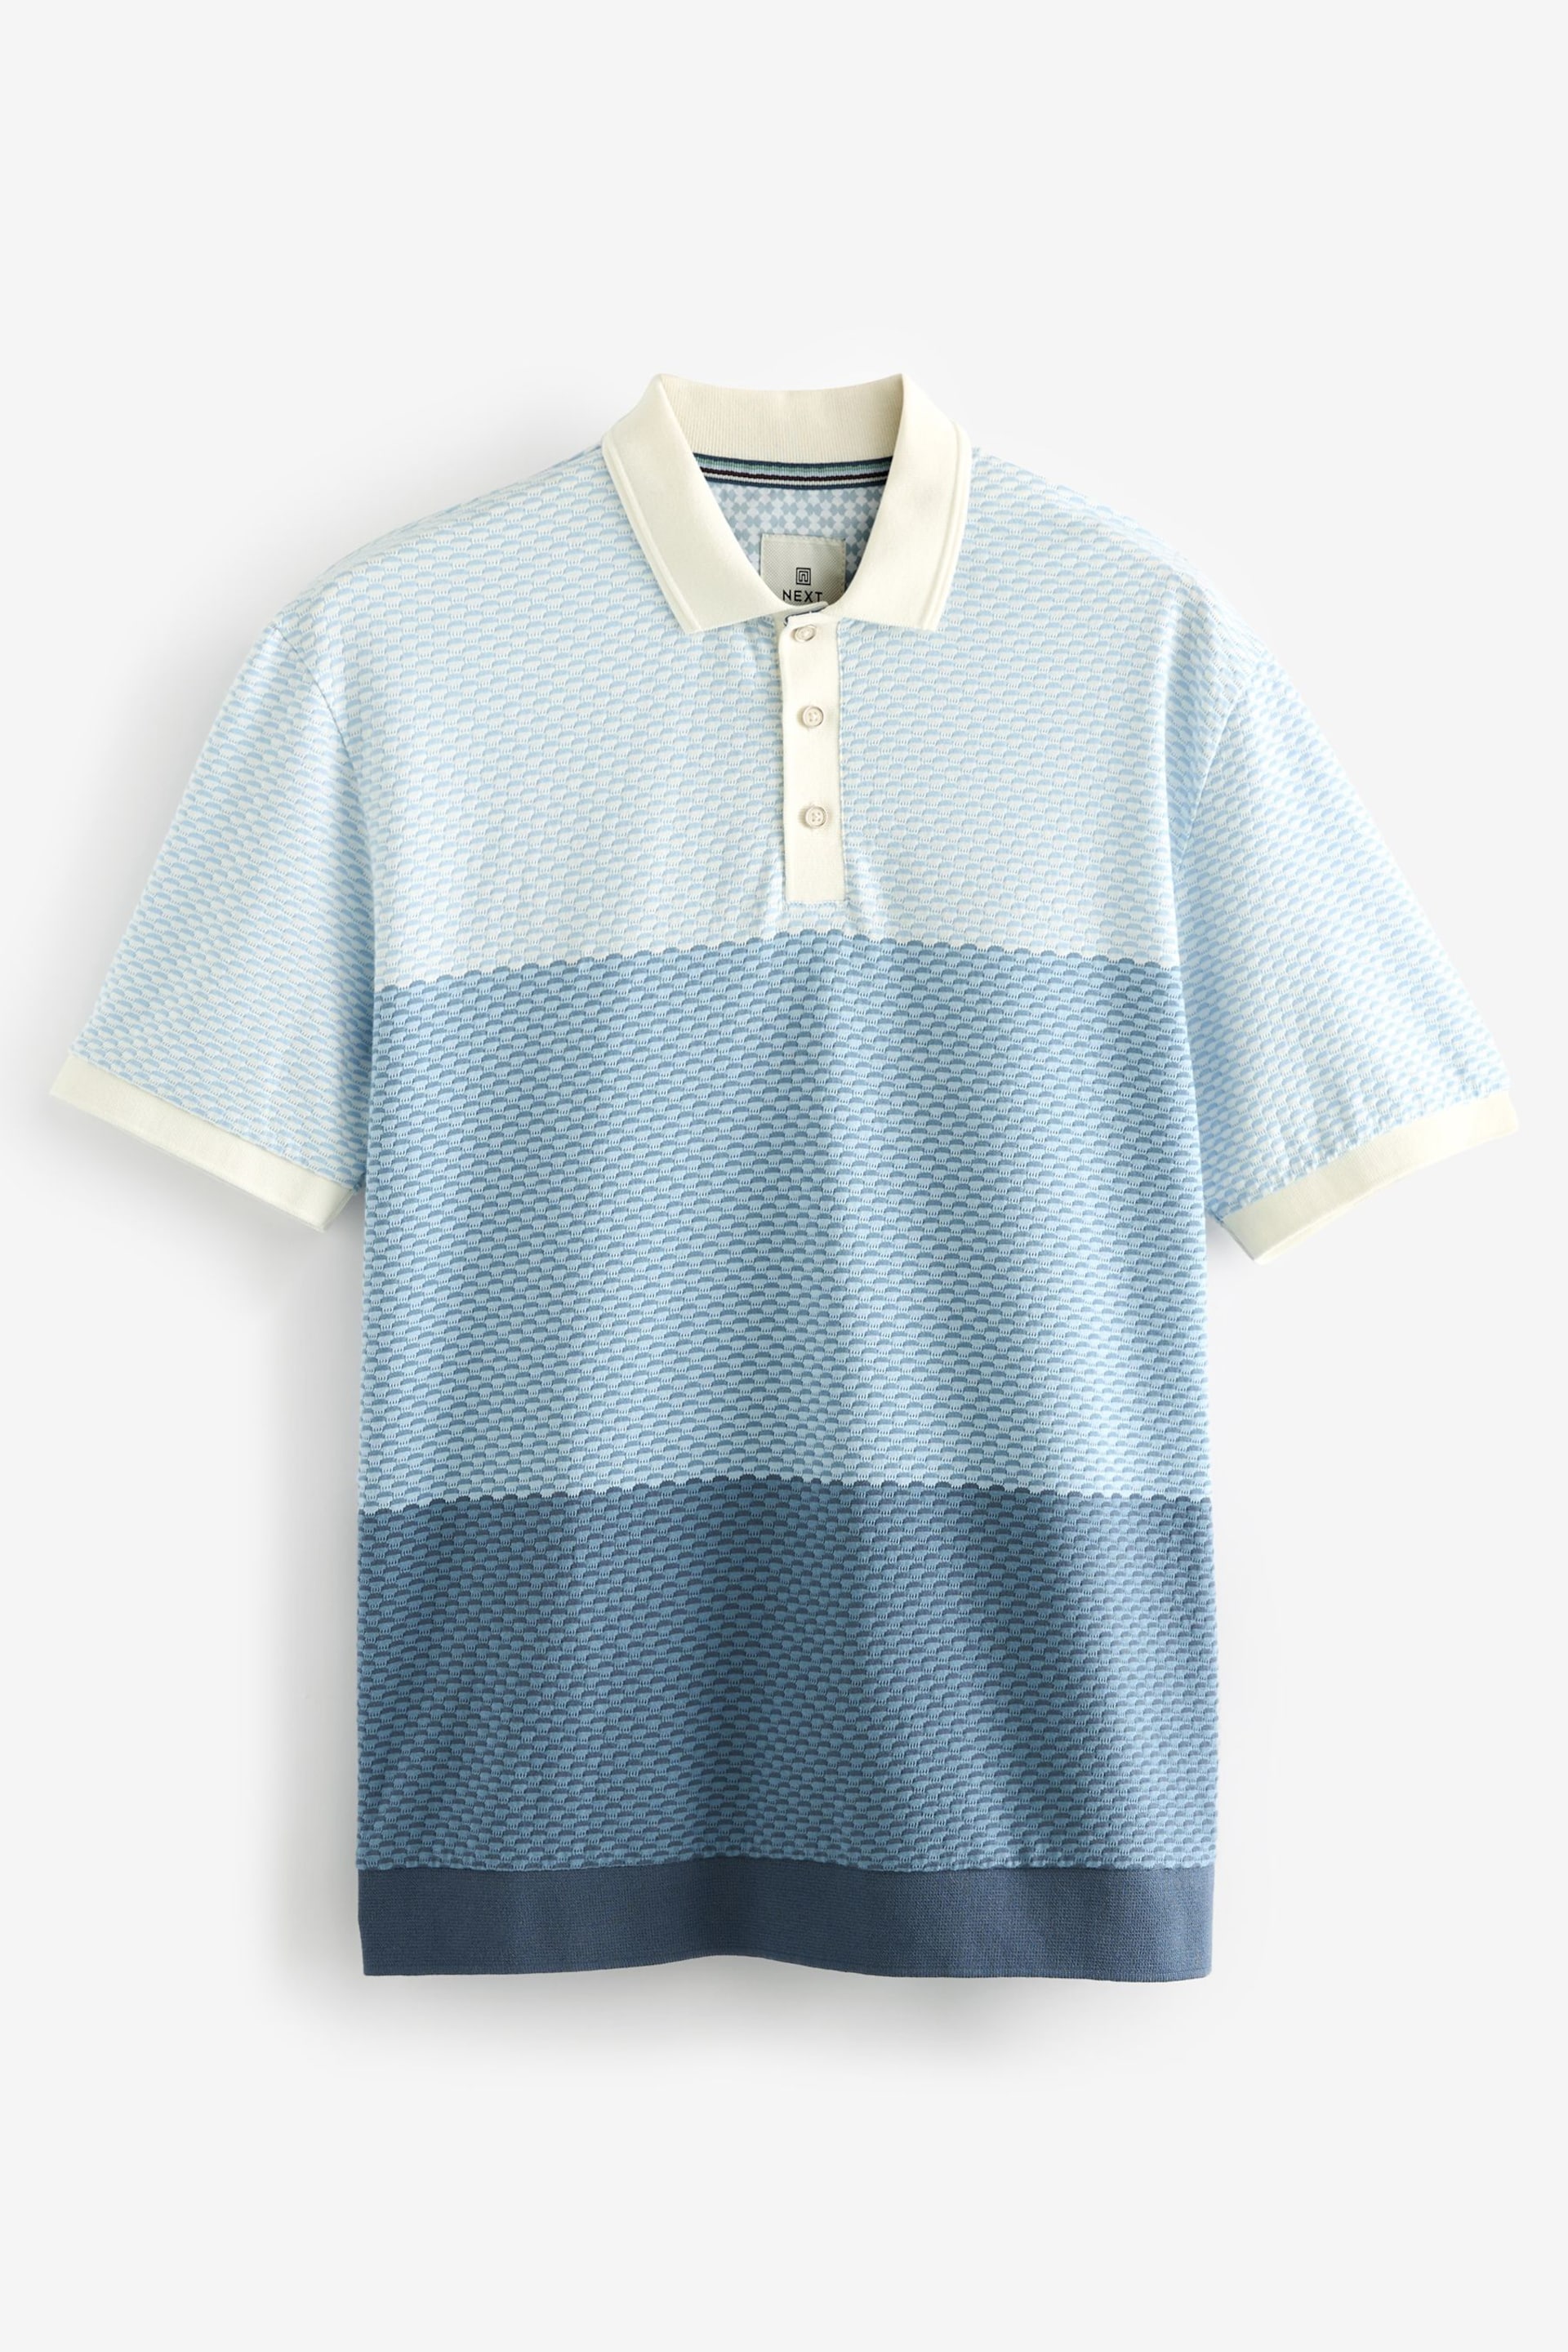 Blue Textured Colour Block Polo Shirt - Image 6 of 8